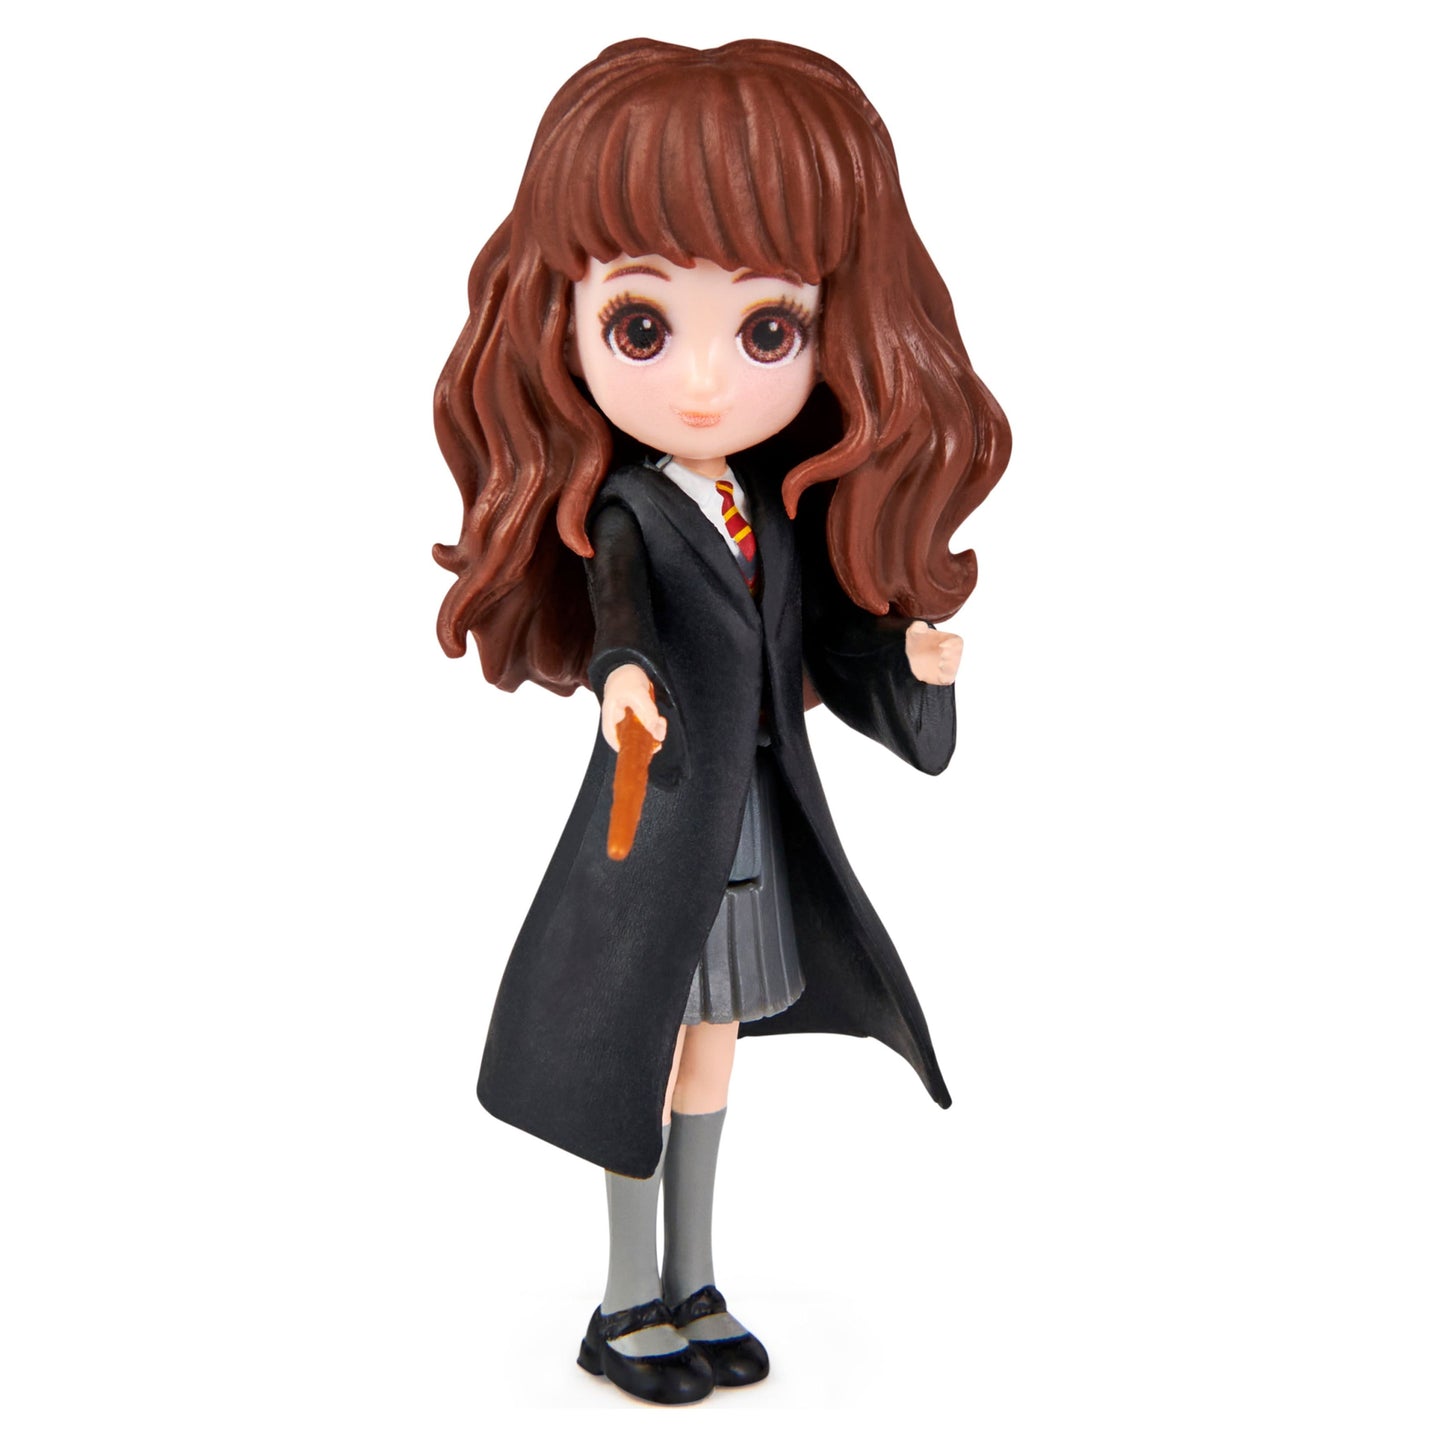 Wizarding World Harry Potter, Magical Minis Collectible 3-inch Hermione Granger Figure, Kids Toys for Ages 6 and up